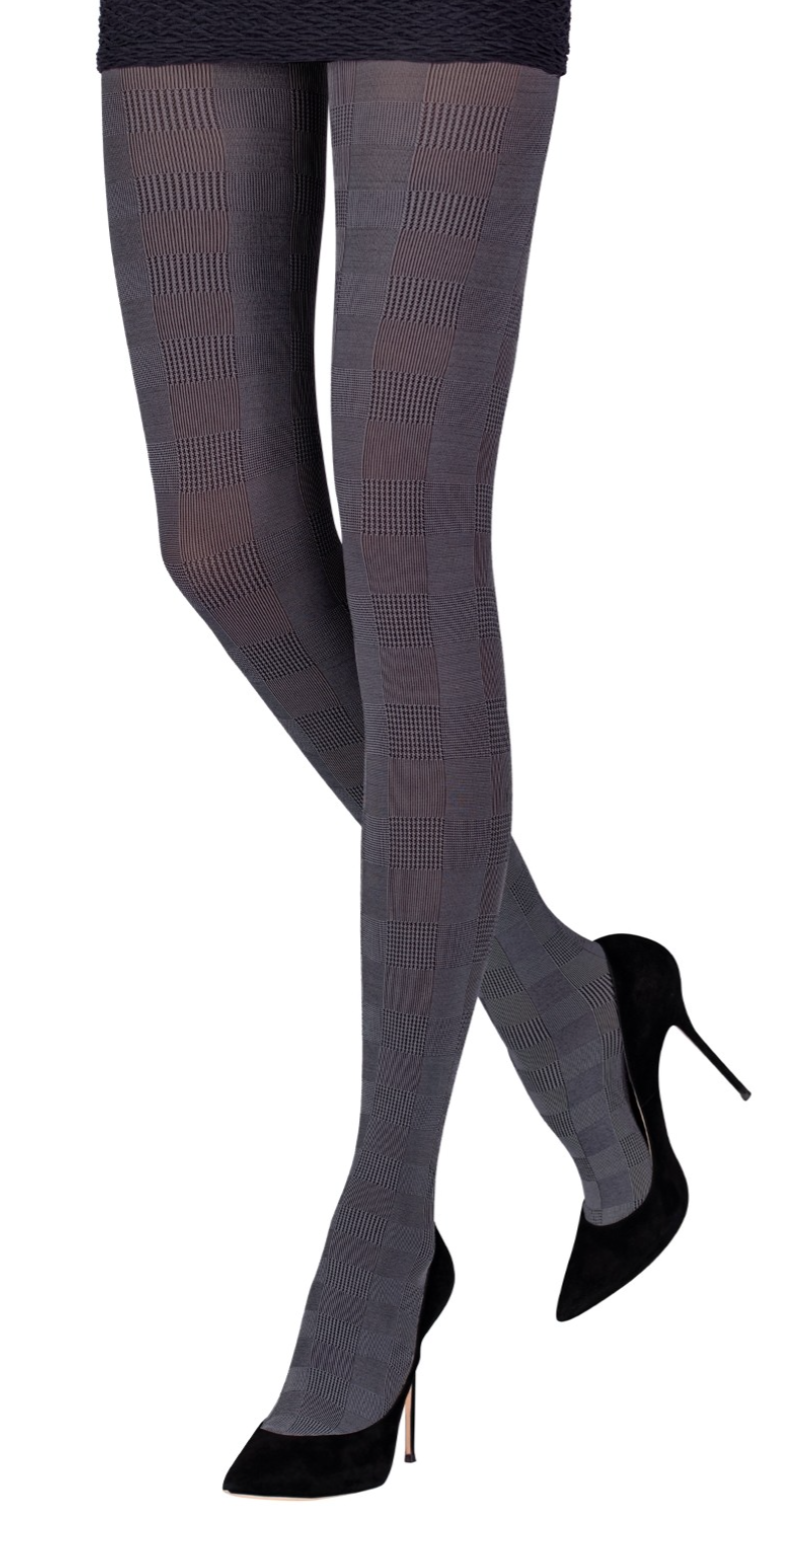 Emilio Cavallini Glen Plaid Tights - Opaque fashion tights with a woven plaid check style pattern in black and grey.